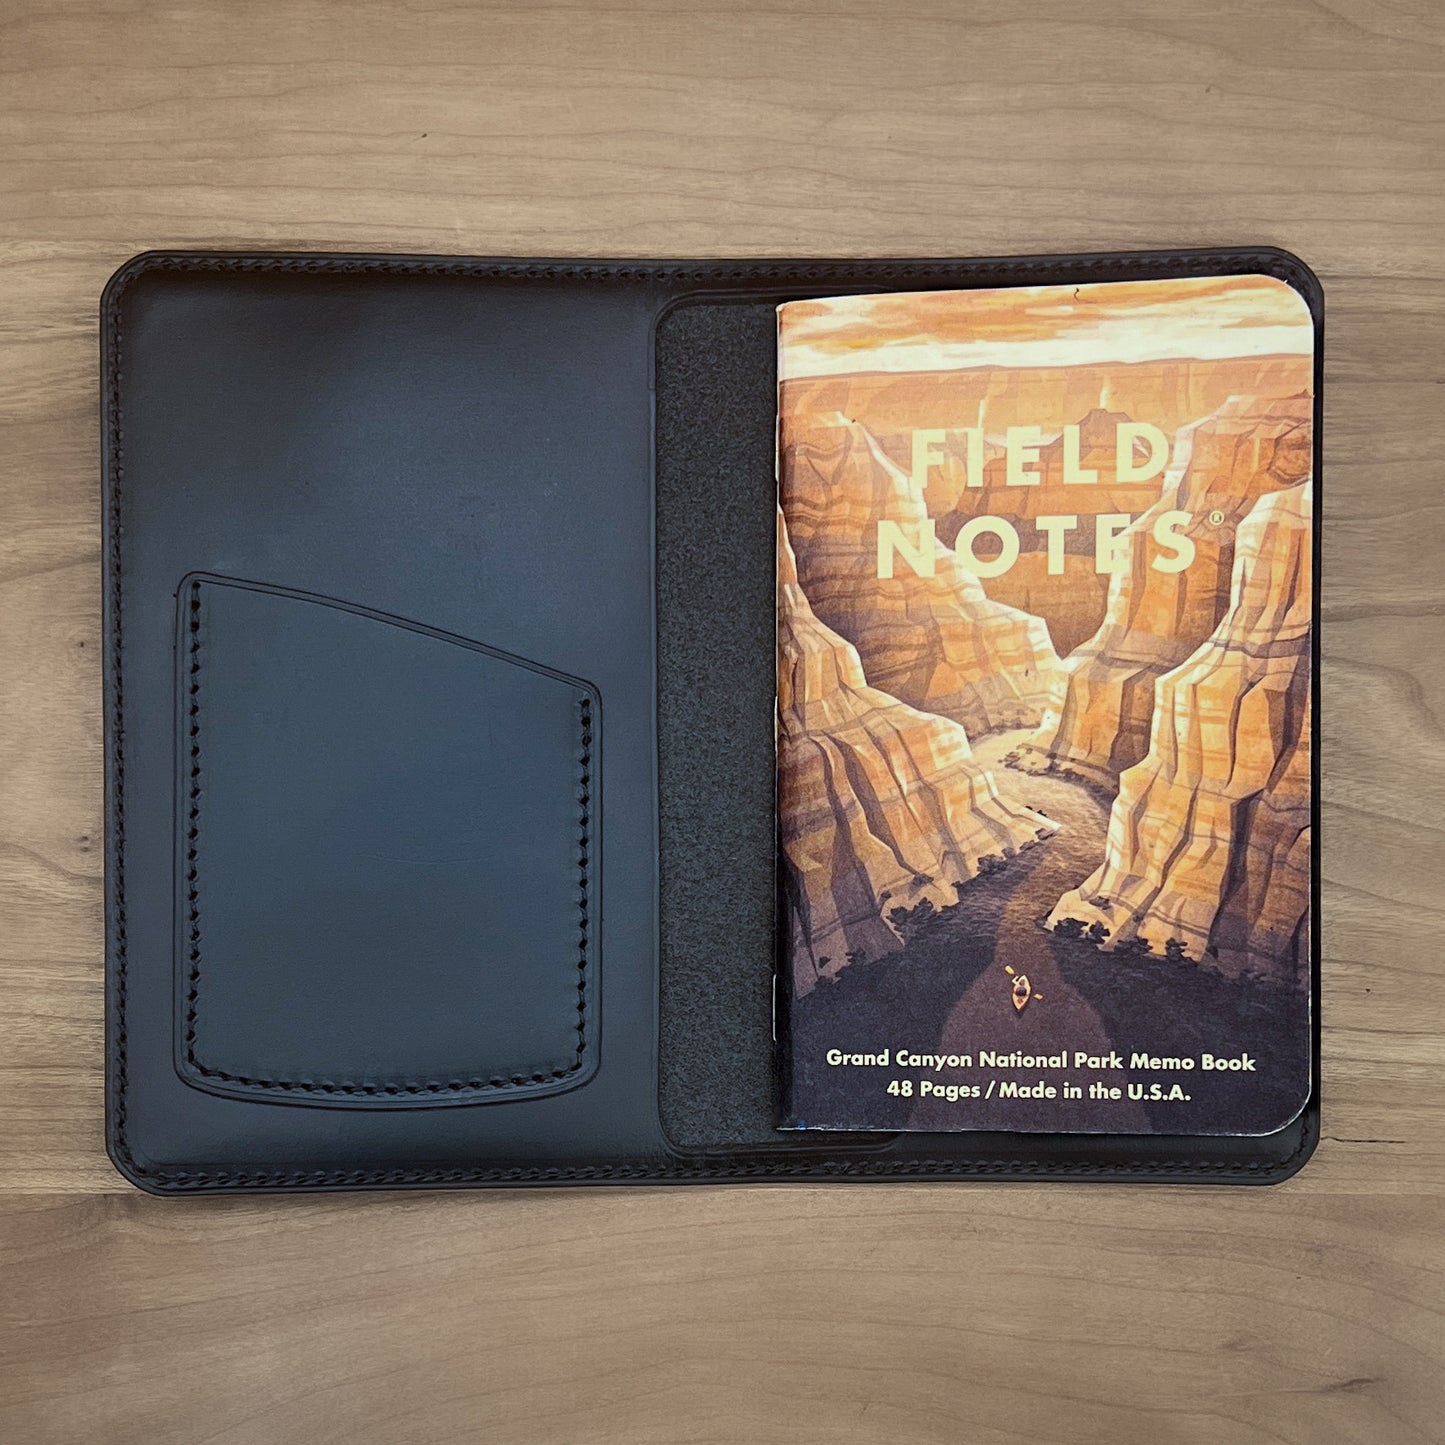 Personalized Notebook Cover for Pocket Sized Refills in Black Horween Leather.